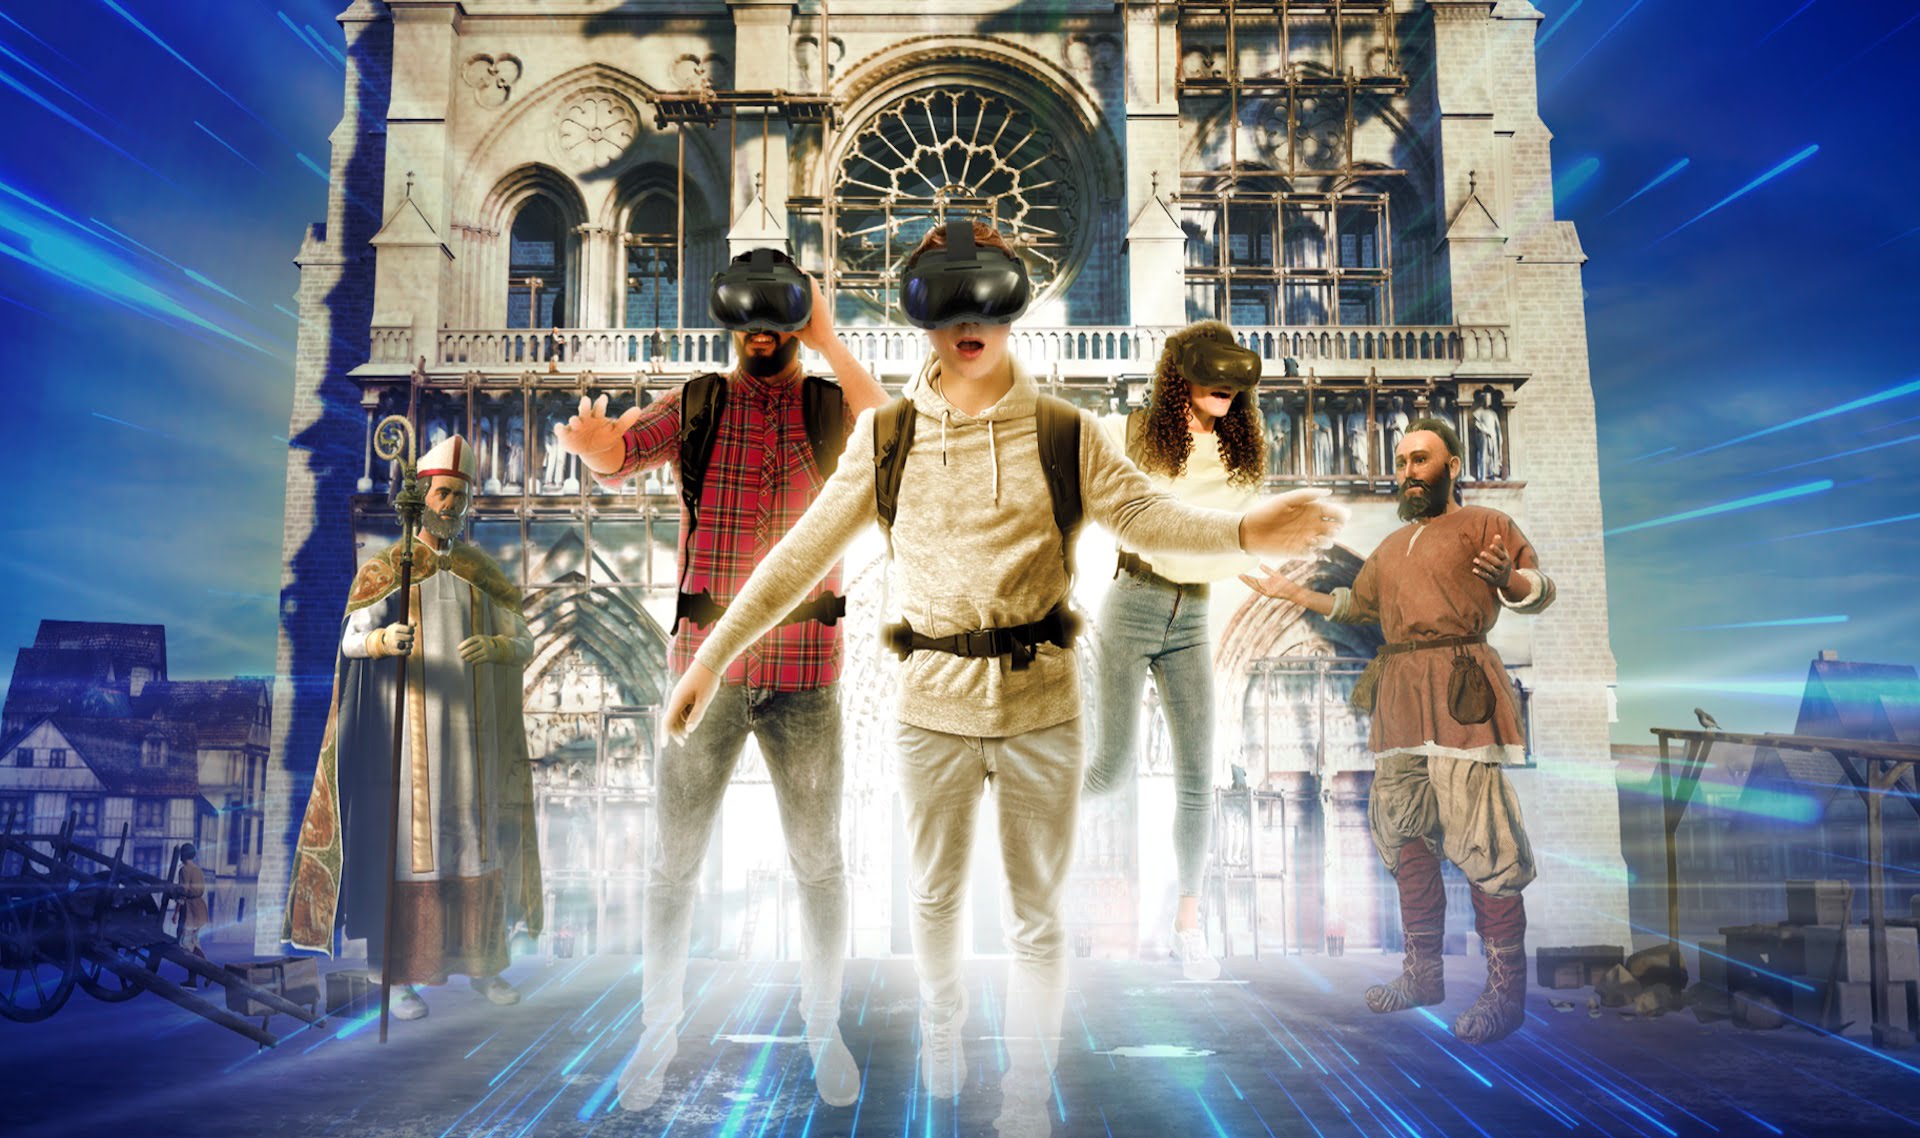 Eternal Notre Dame: VR time travel through 850 years of Parisian history